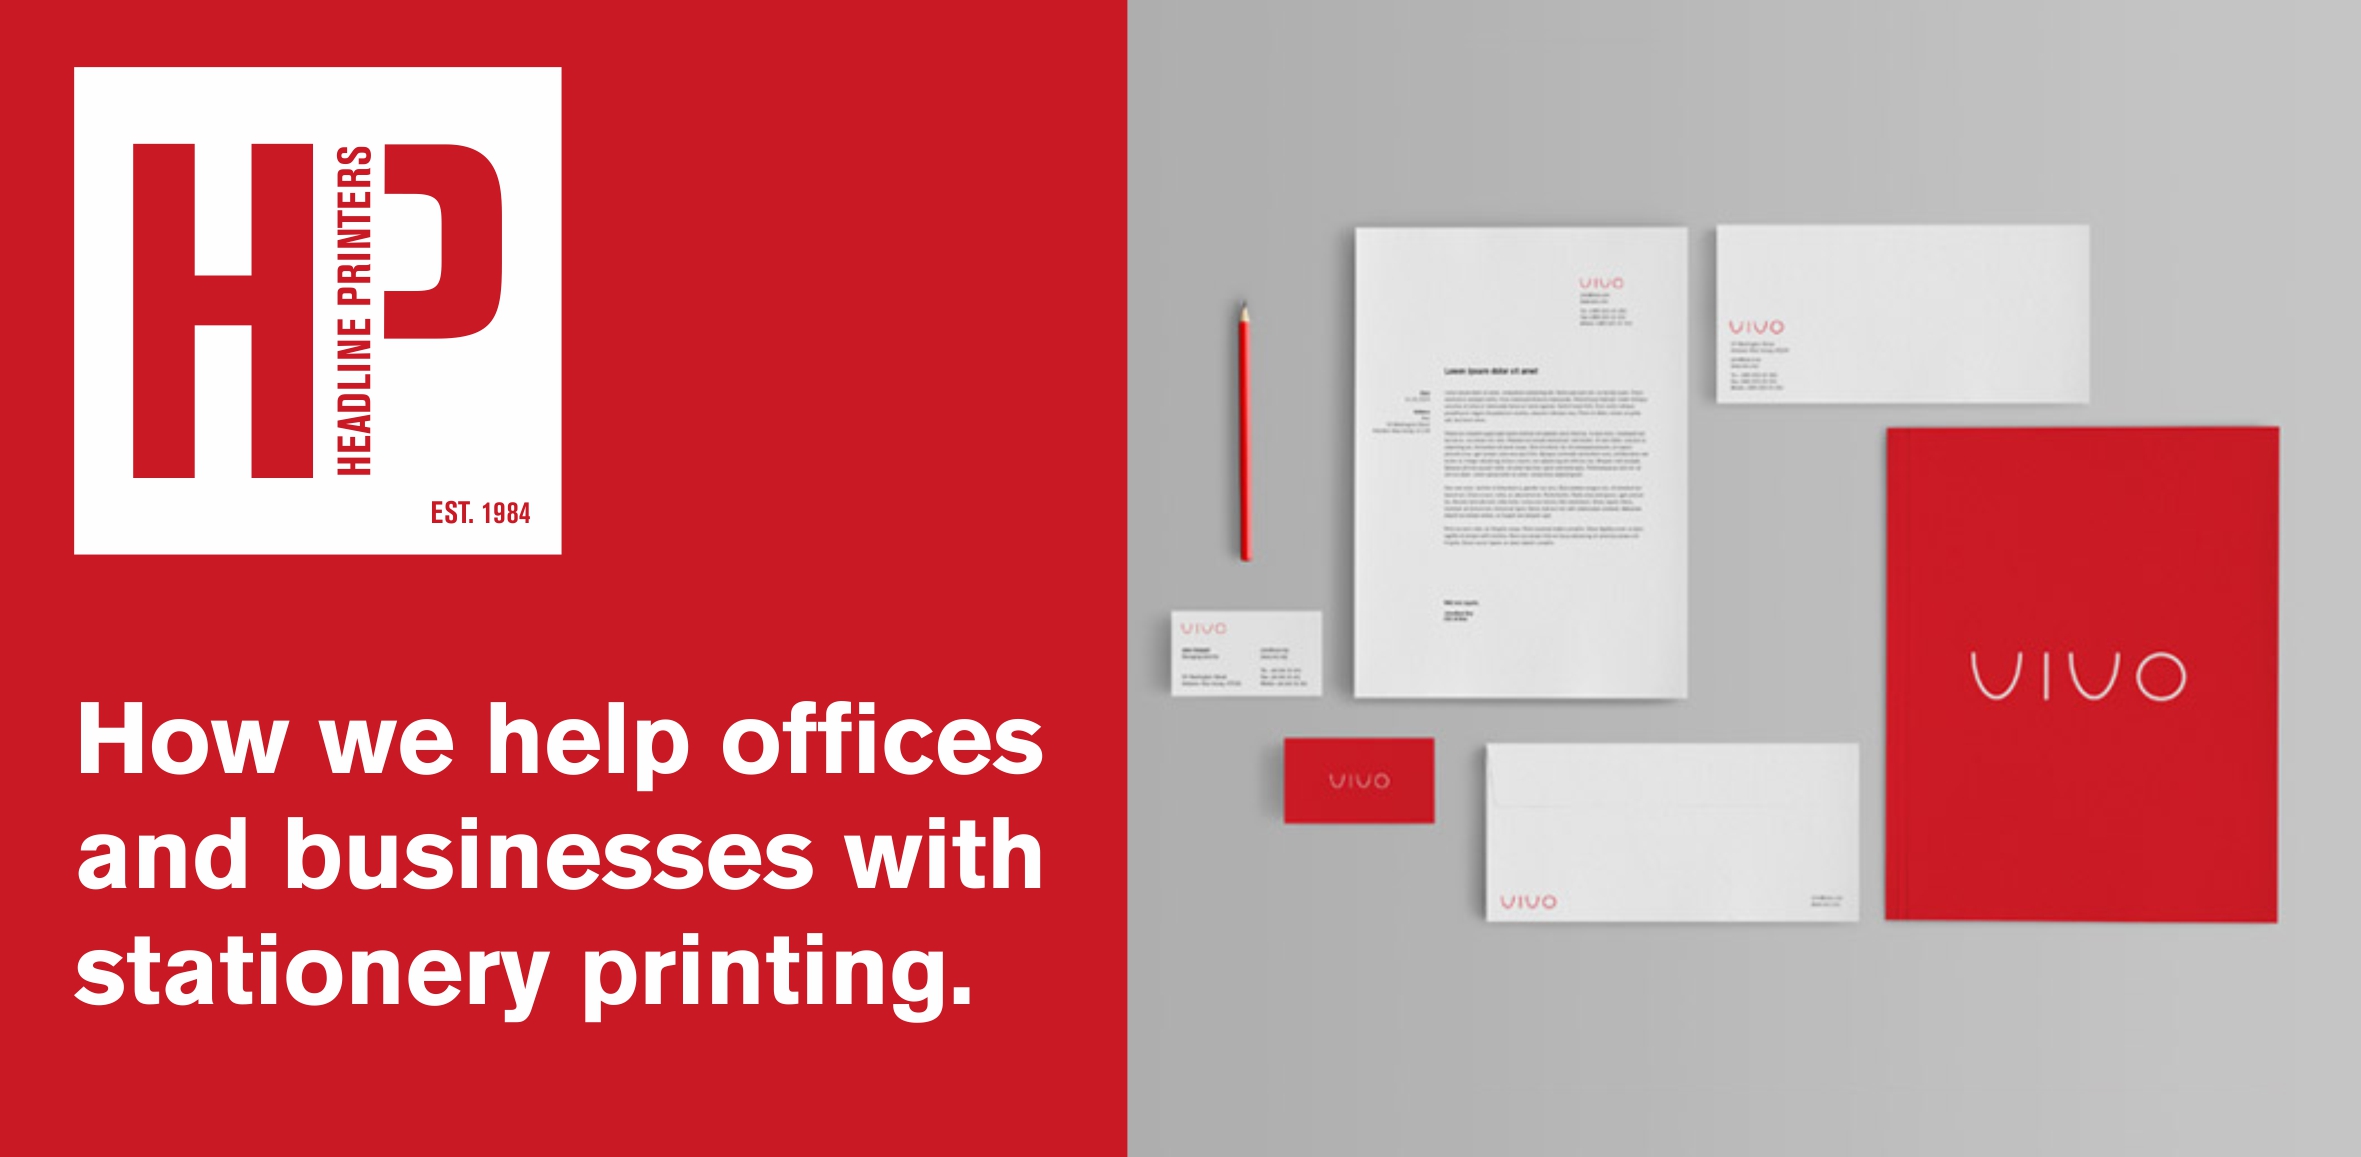 How we help offices and businesses with stationery